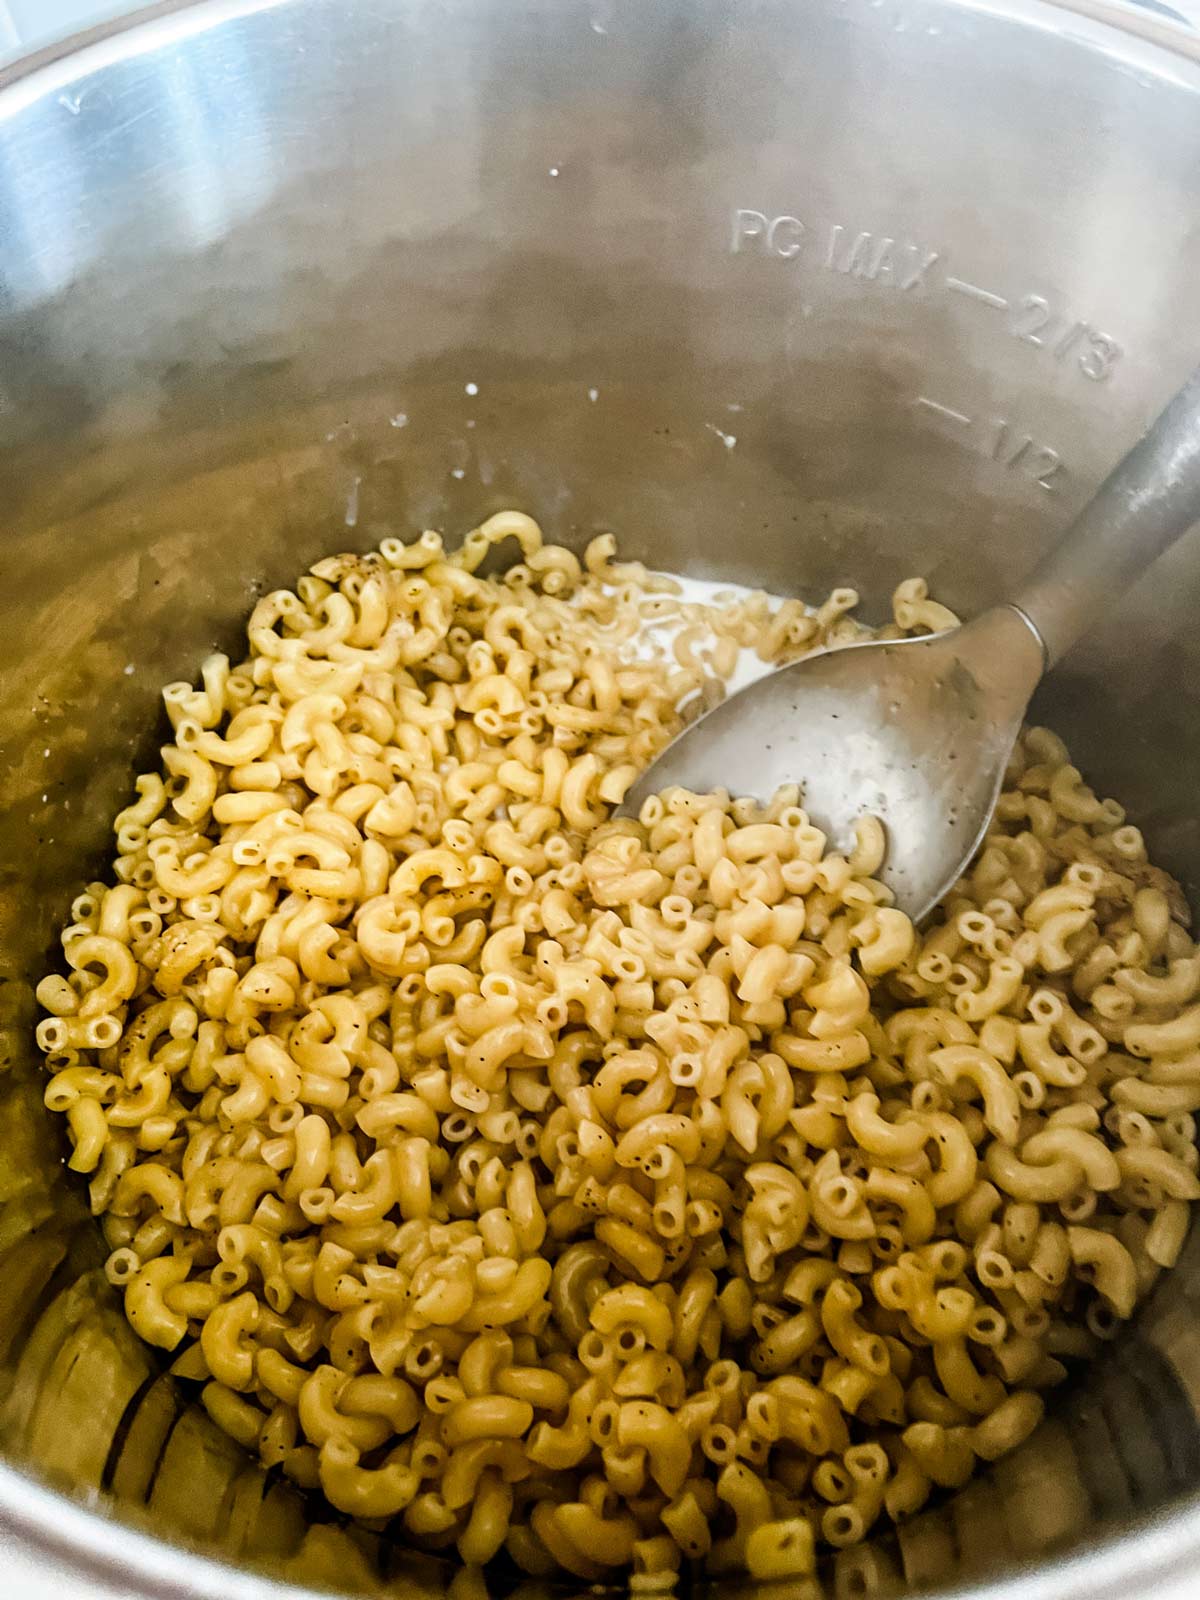 Milk stirred into cooked elbow noodles in an Instant Pot.